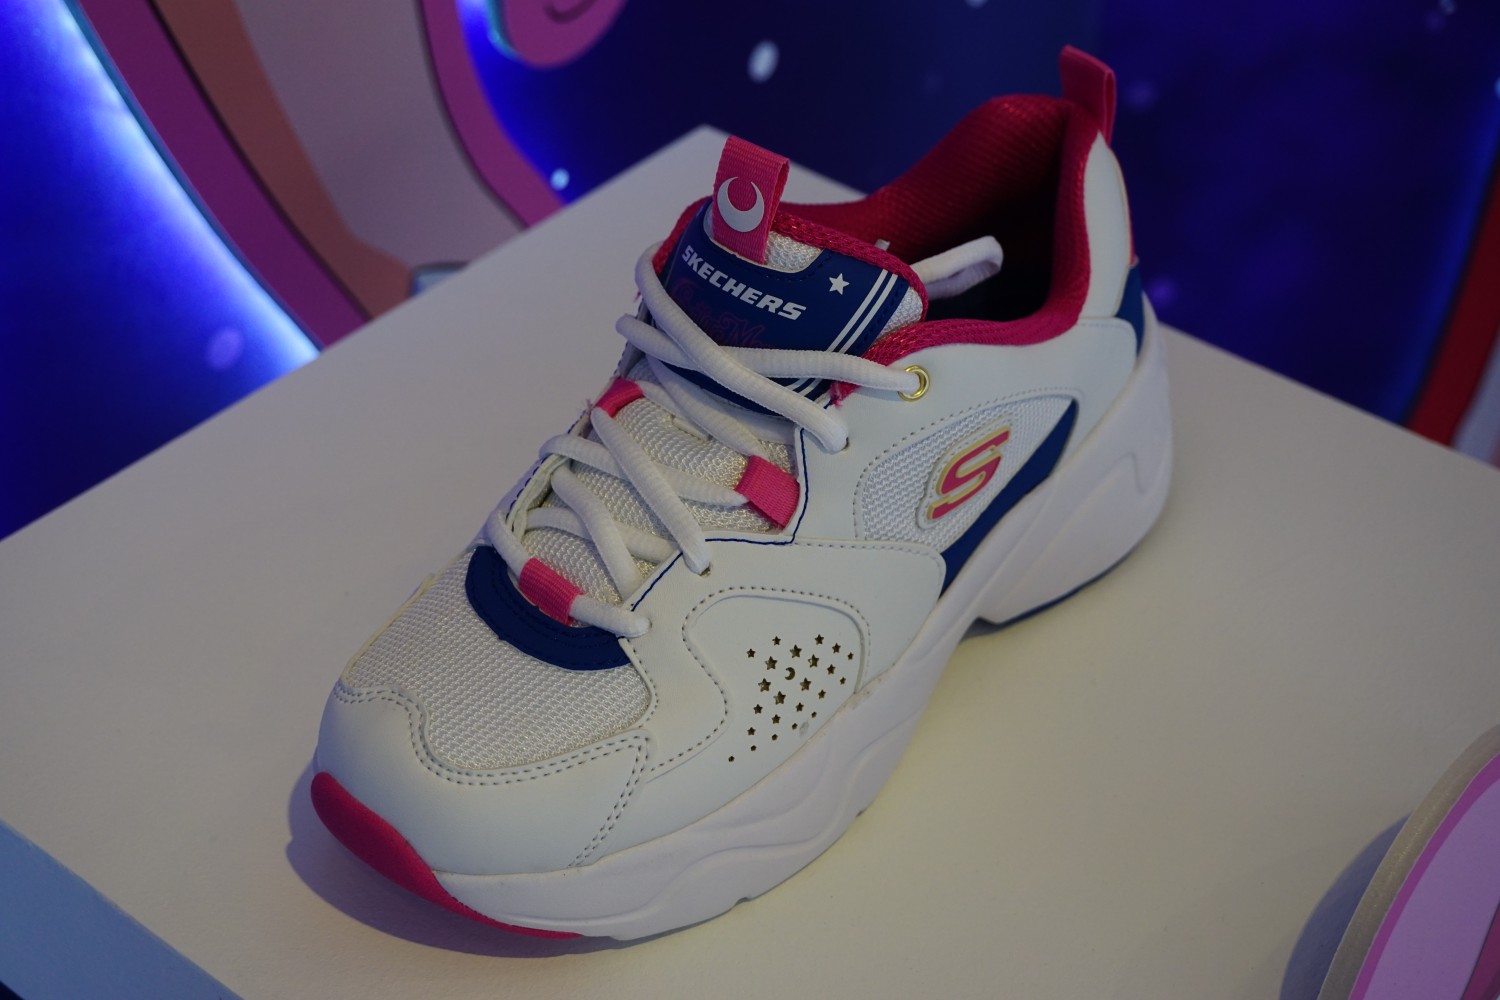 Sailor Moon x Skechers Sneakers Release Info: What You Need to